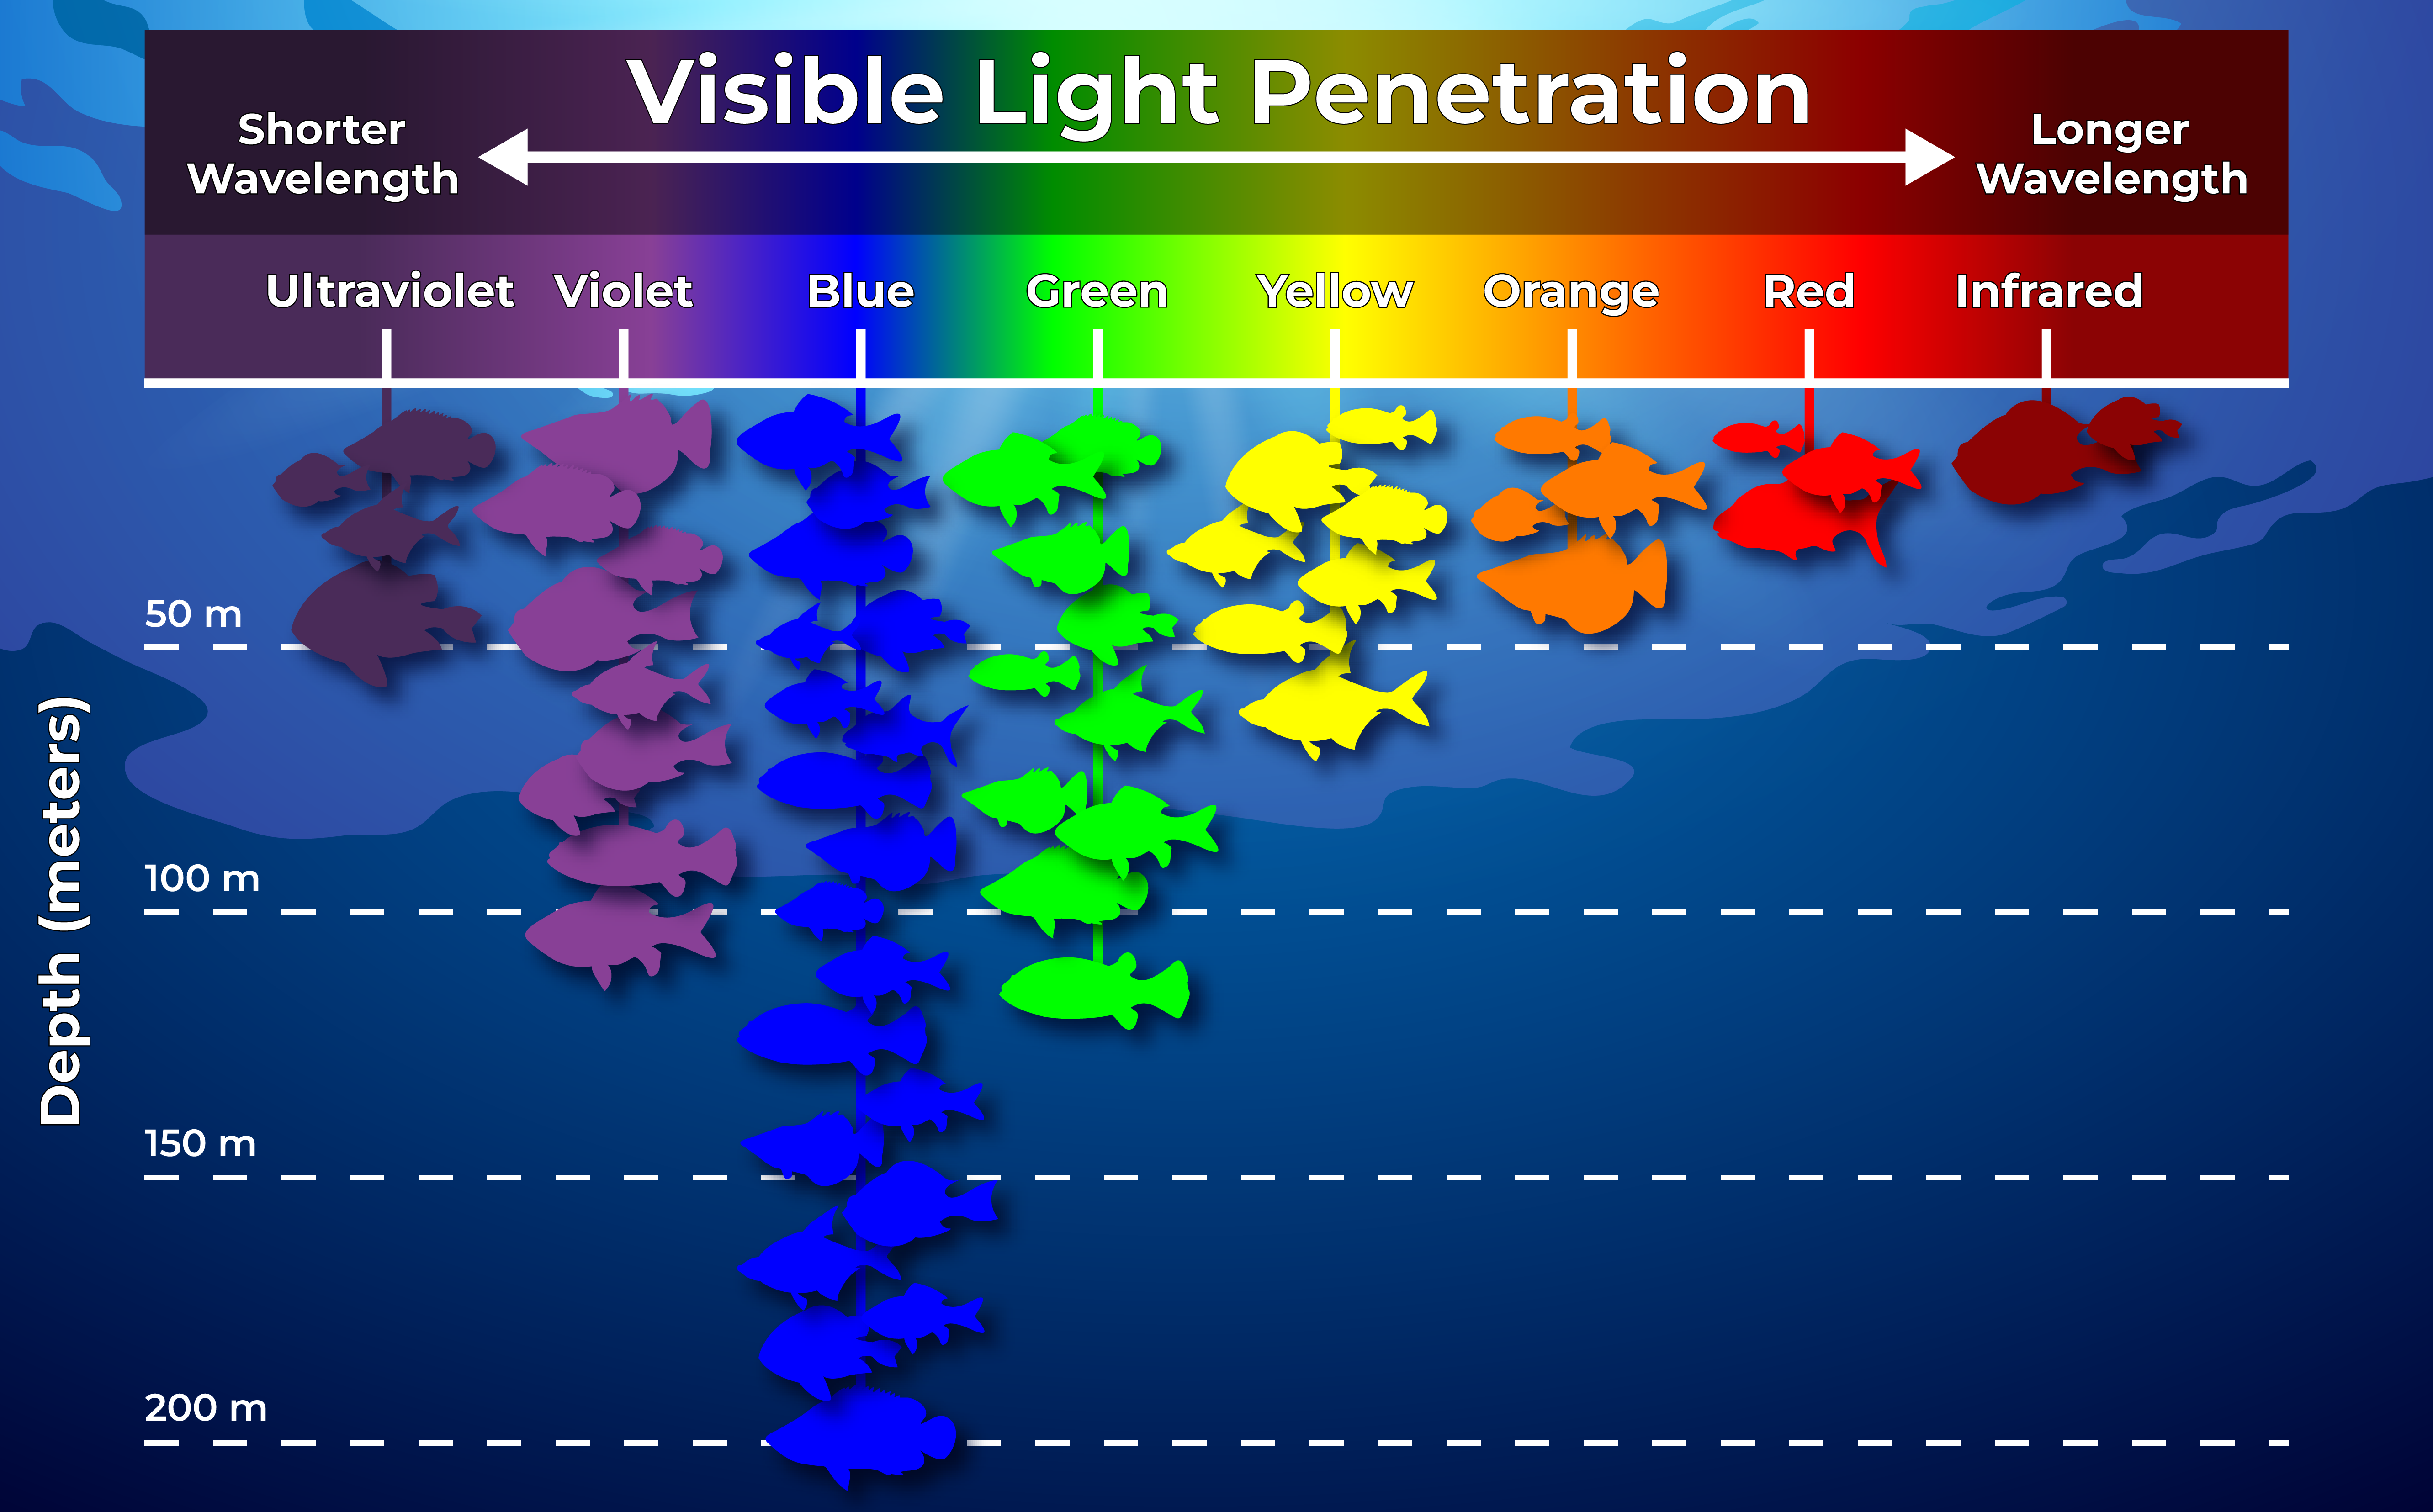 This illustration shows the approximate penetration of different wavelengths of visible light (colors) in ocean water. The actual depths of penetration will vary by location, depending on environmental conditions such as water clarity, time of day, etc.